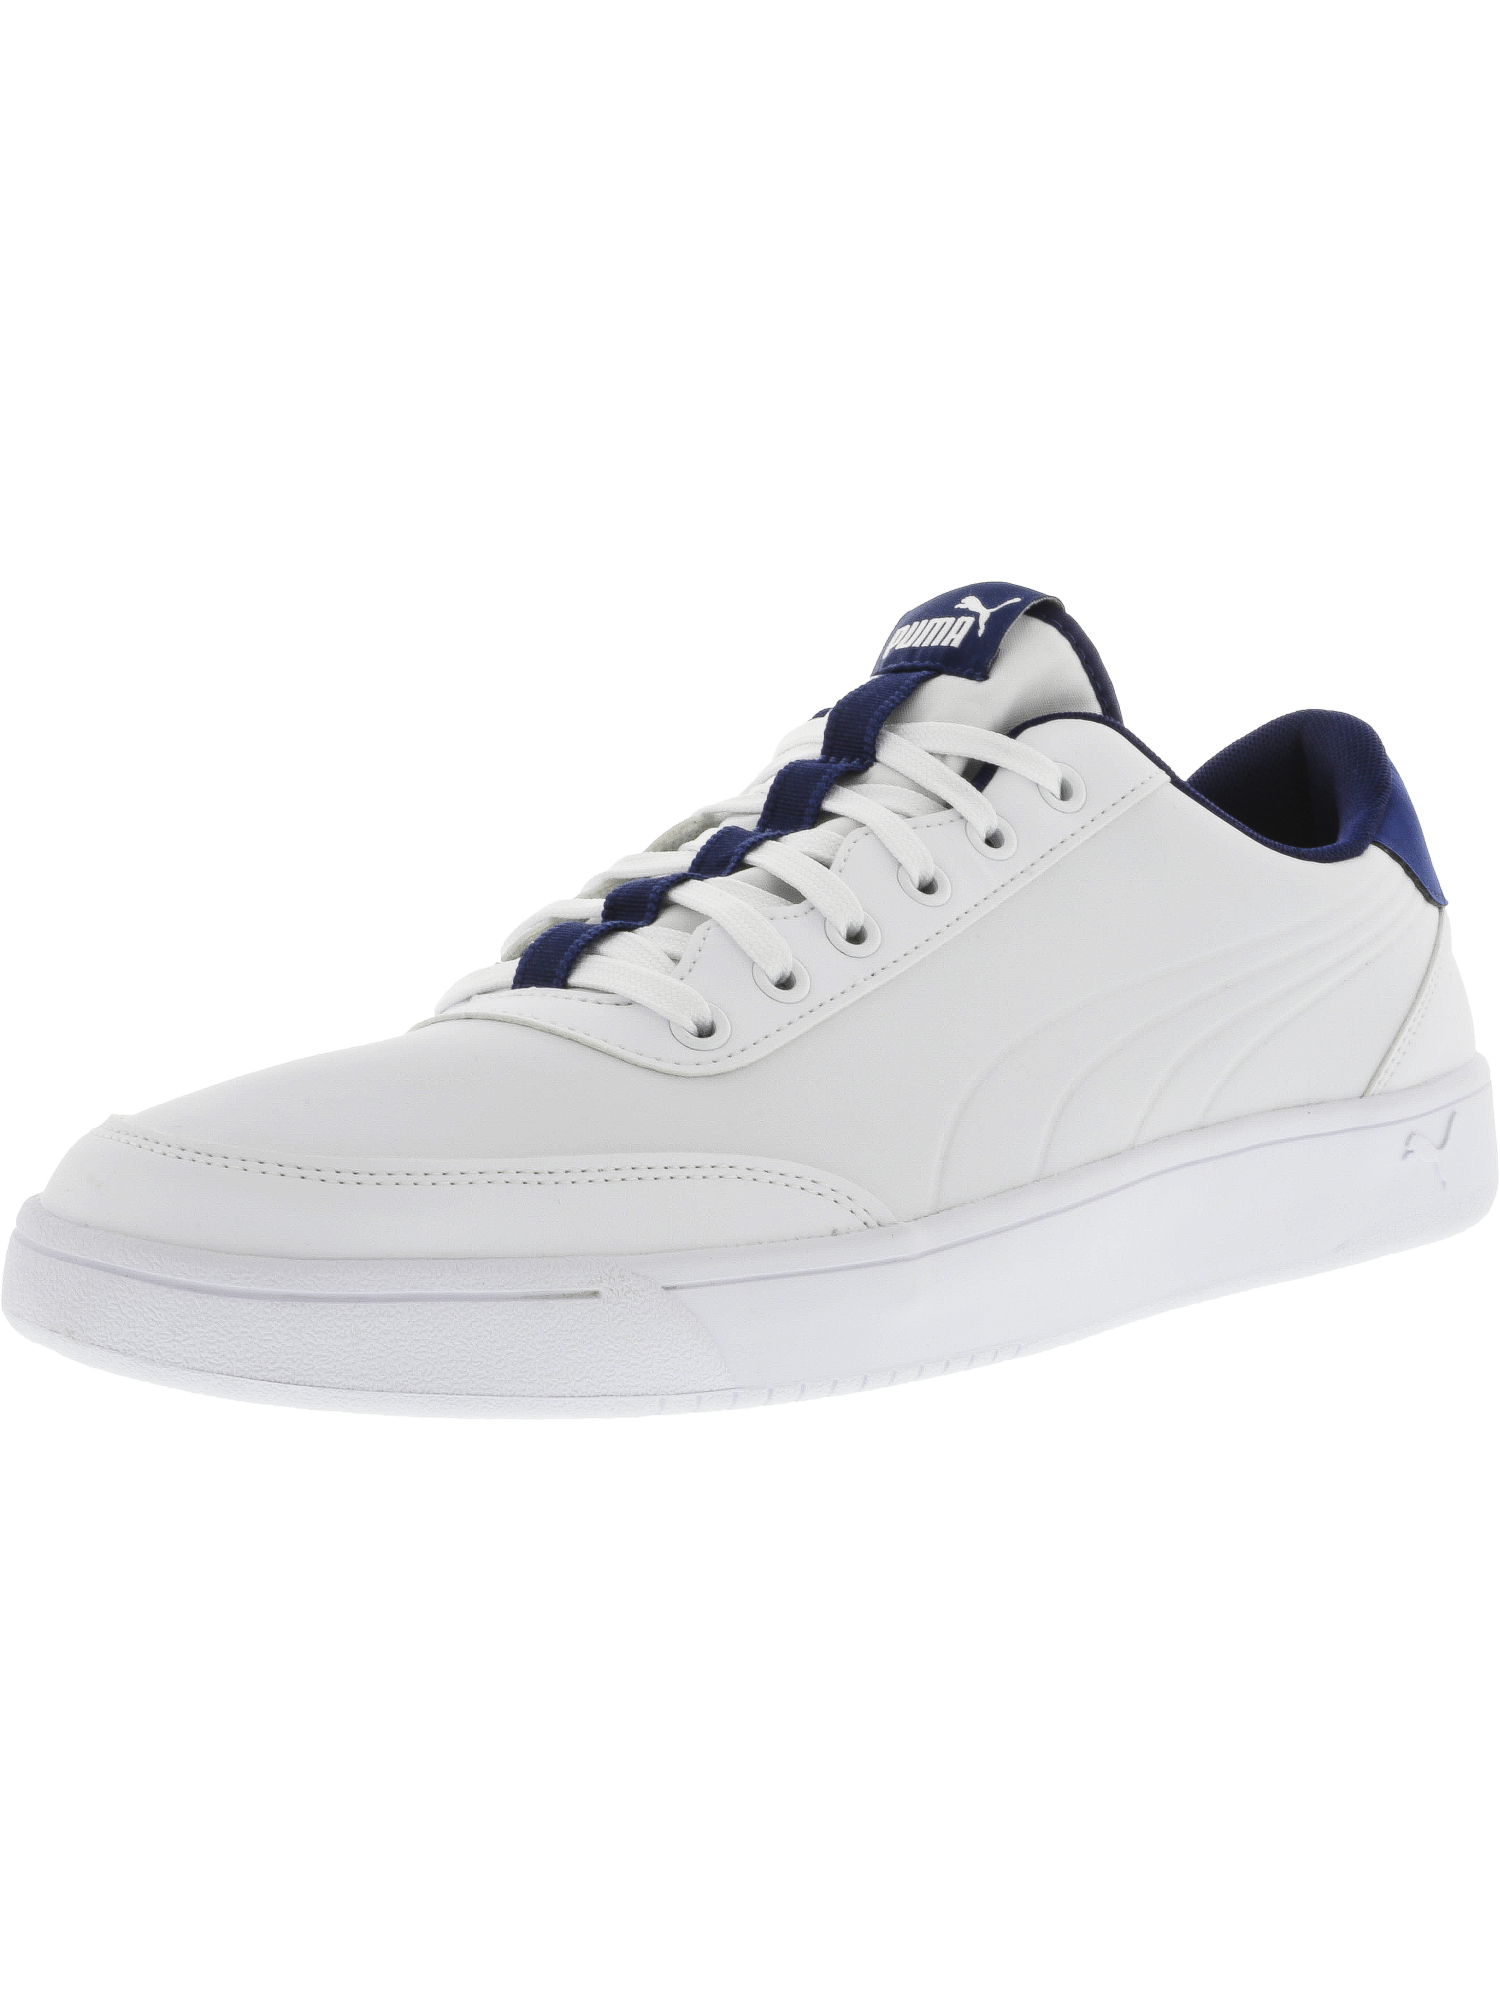 puma white shoes without laces